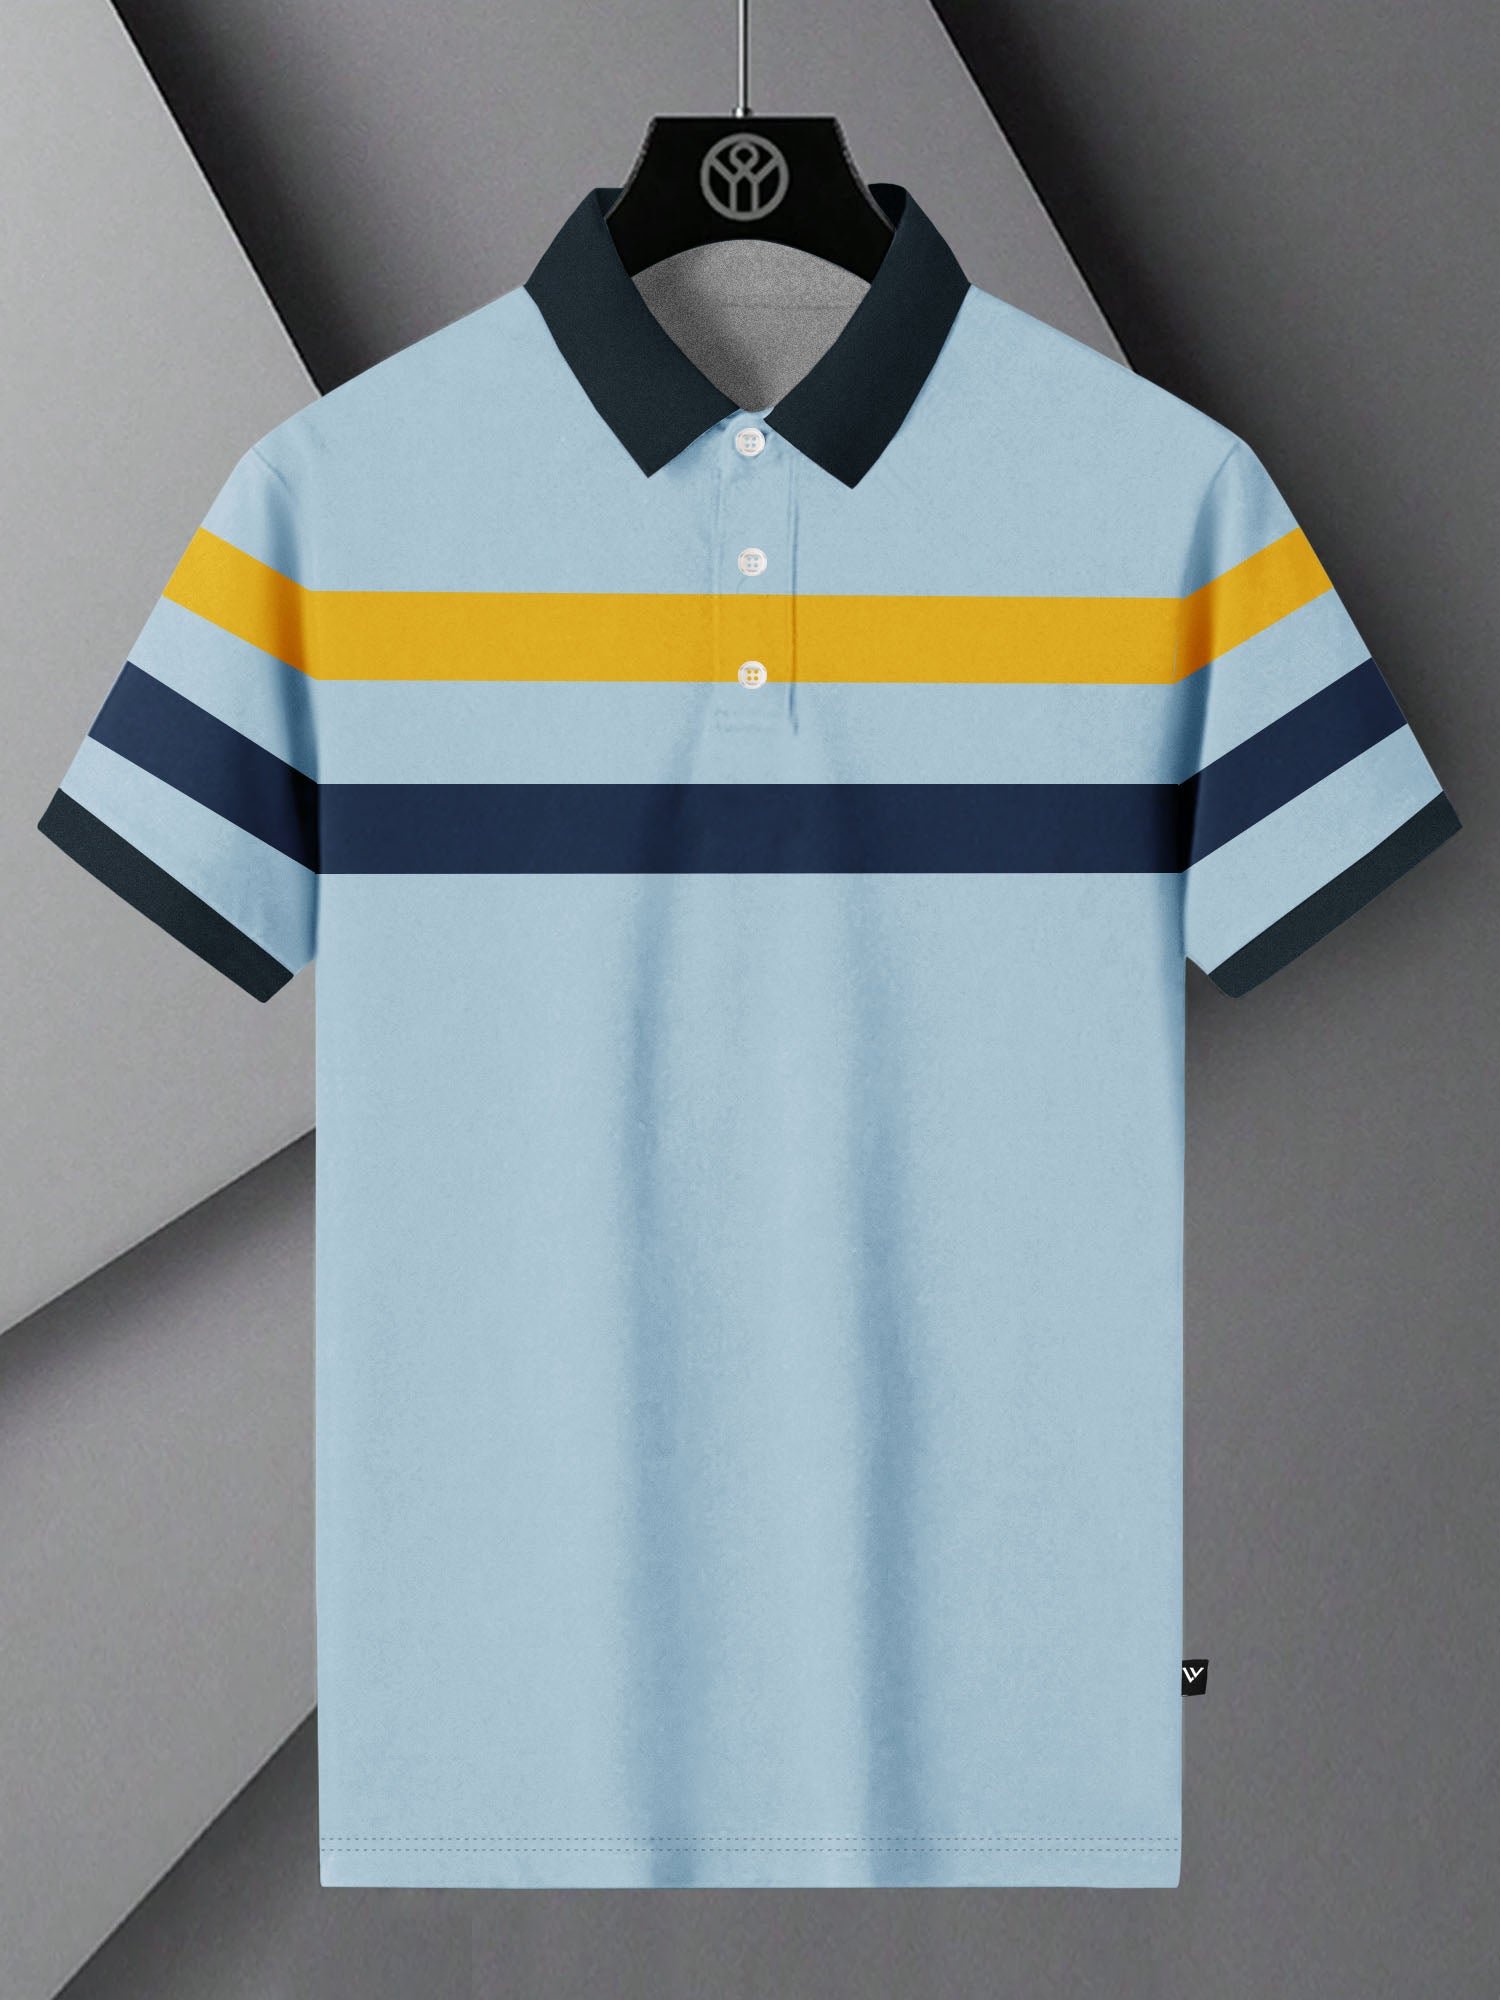 NXT Summer Polo Shirt For Men-Sky Blue With Stripes-SP1520/RT2355